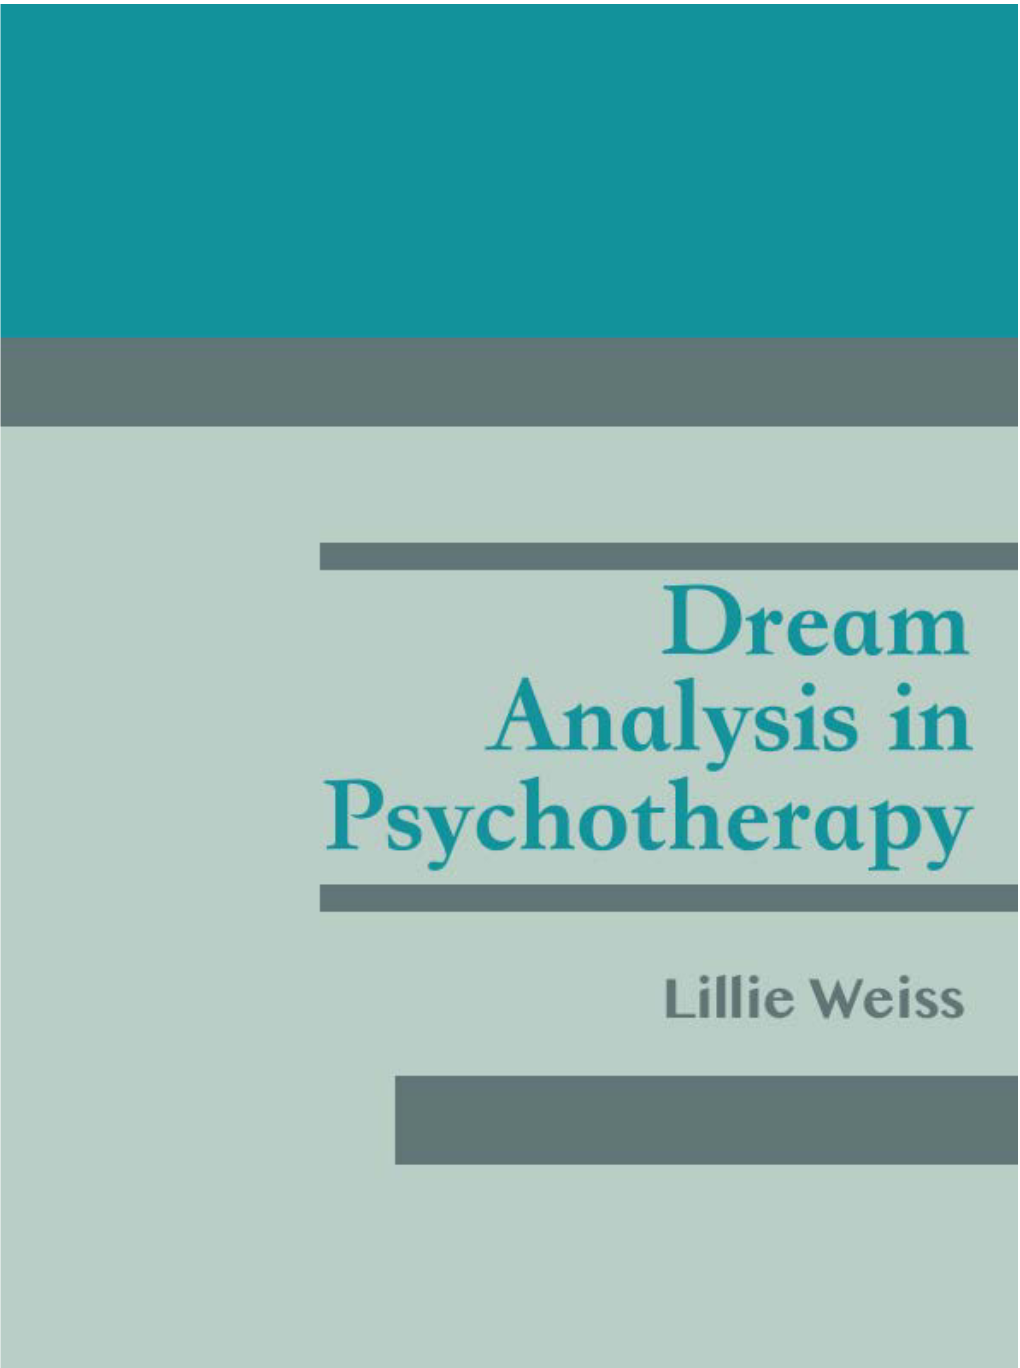 Dream Analysis in Psychotherapy